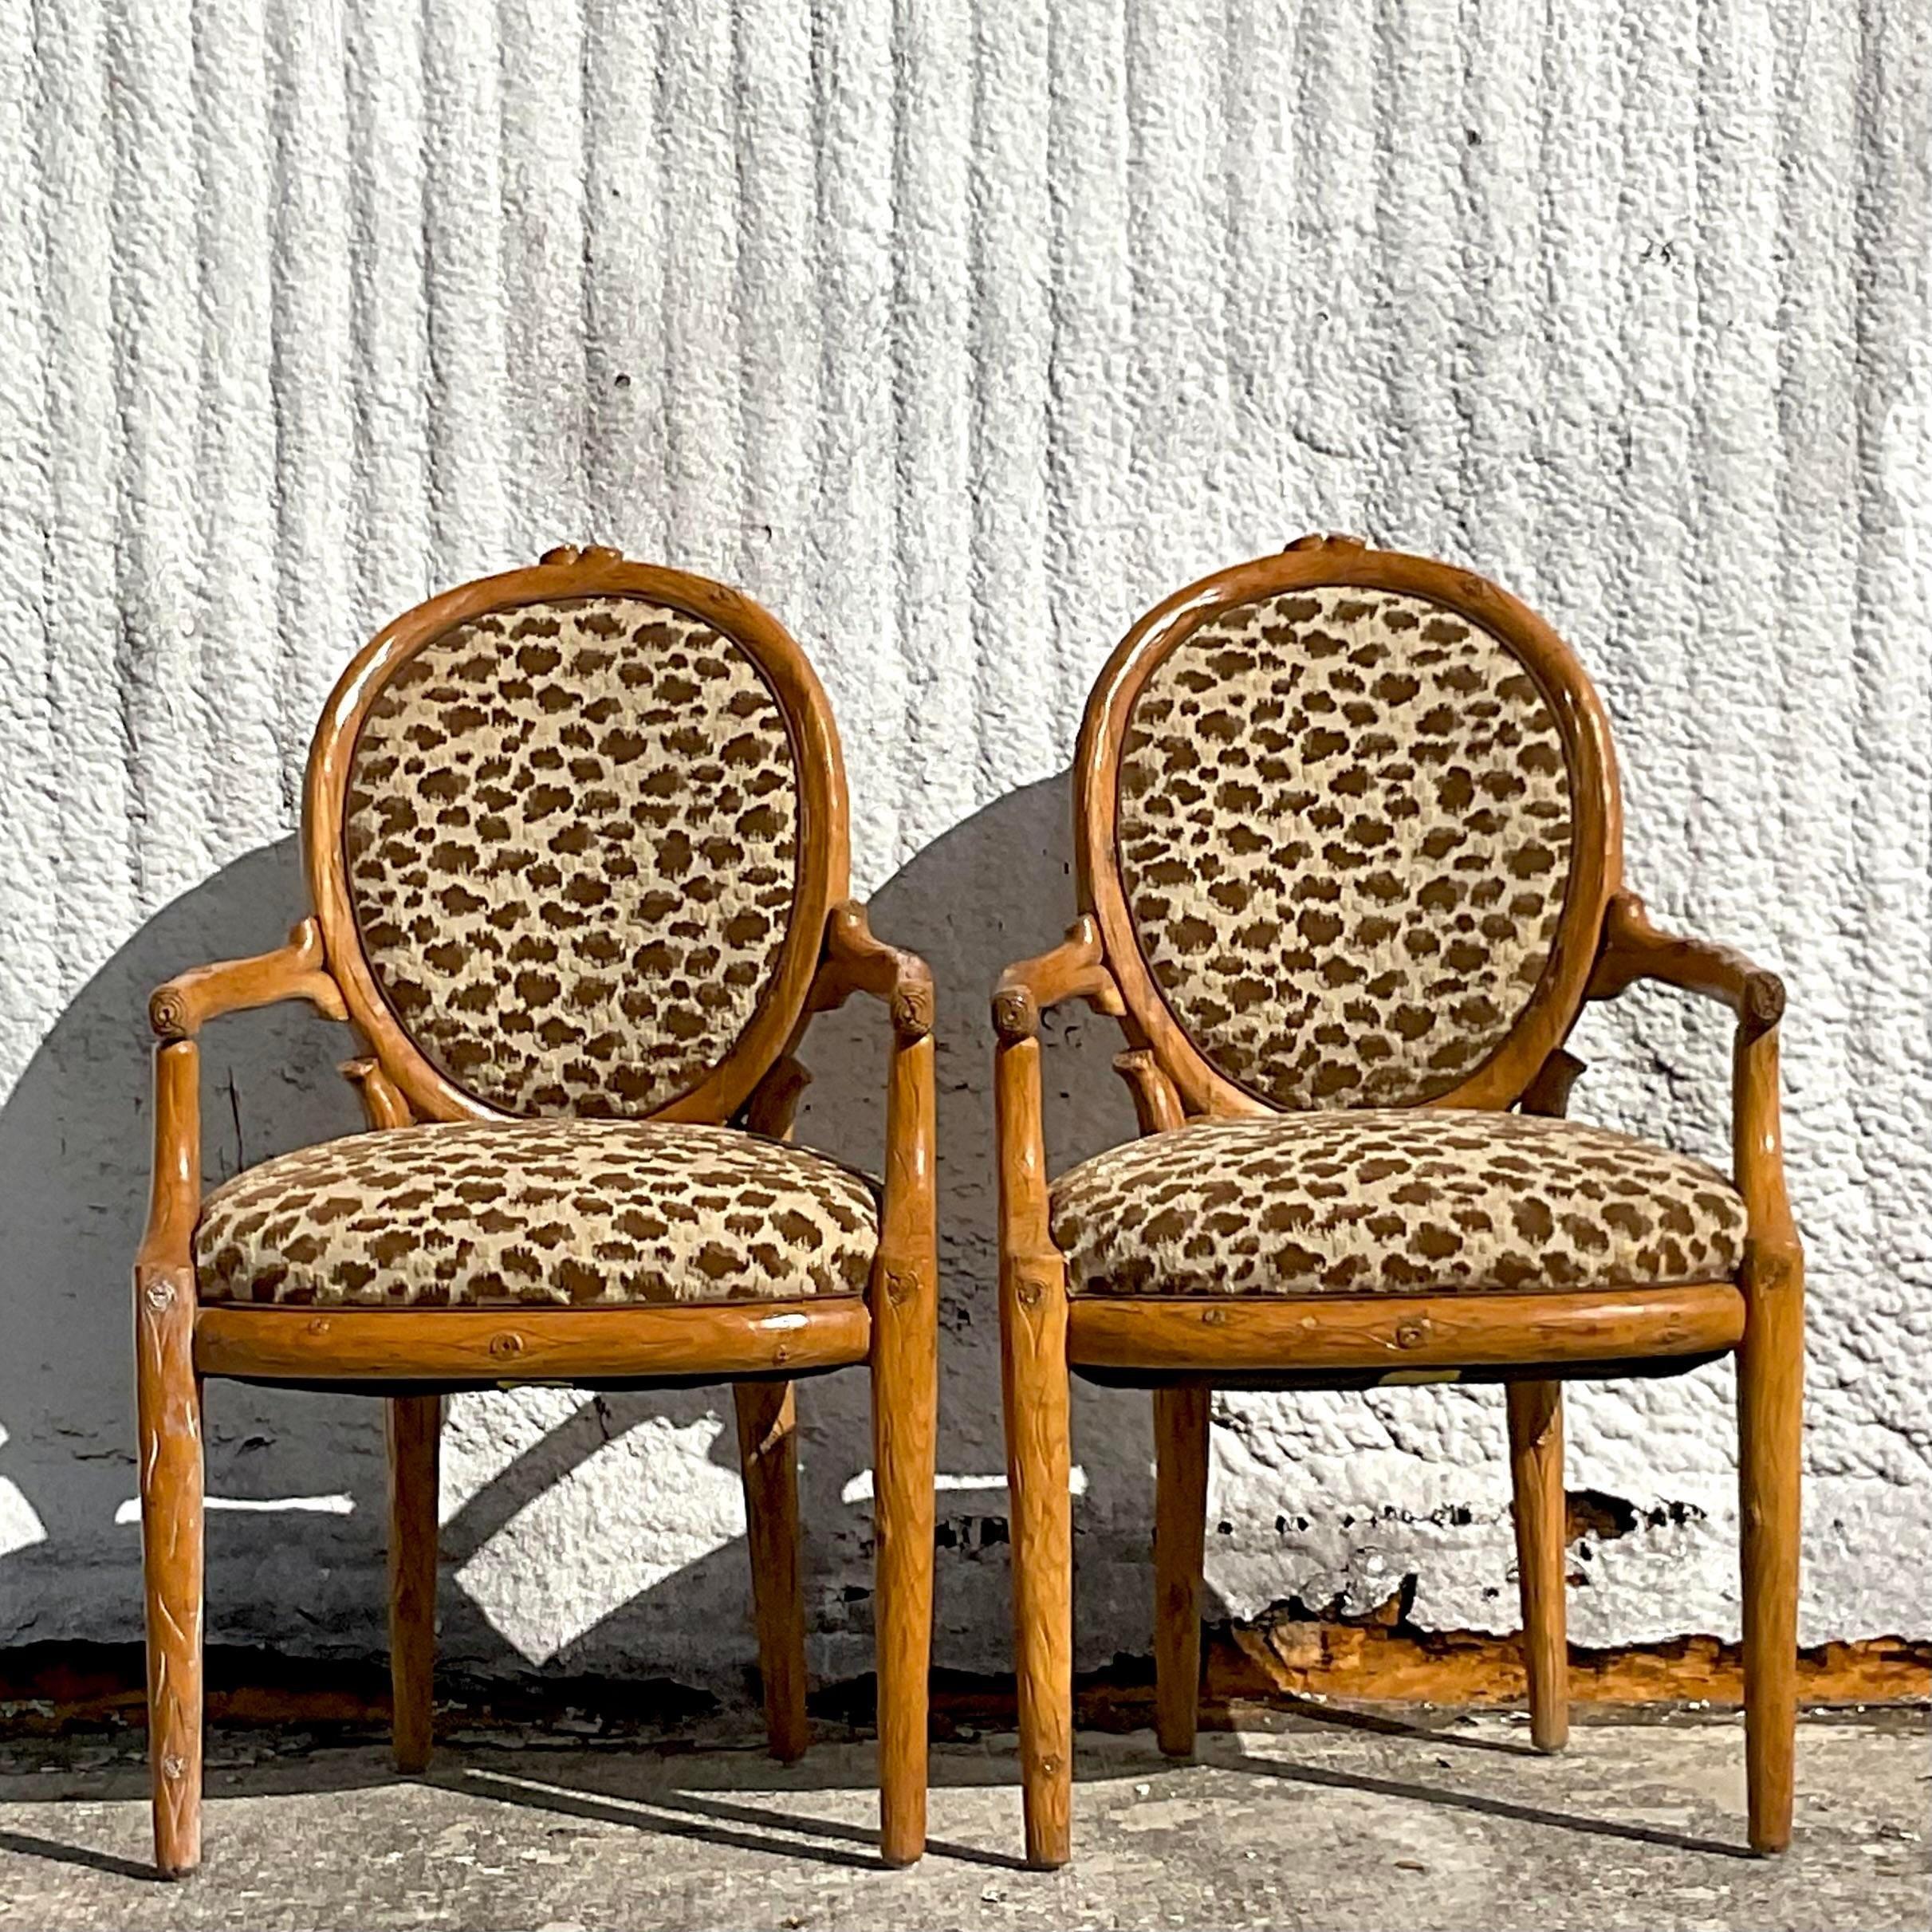 20th Century Vintage Boho Carved Faux Bois Arm Chairs - a Pair For Sale